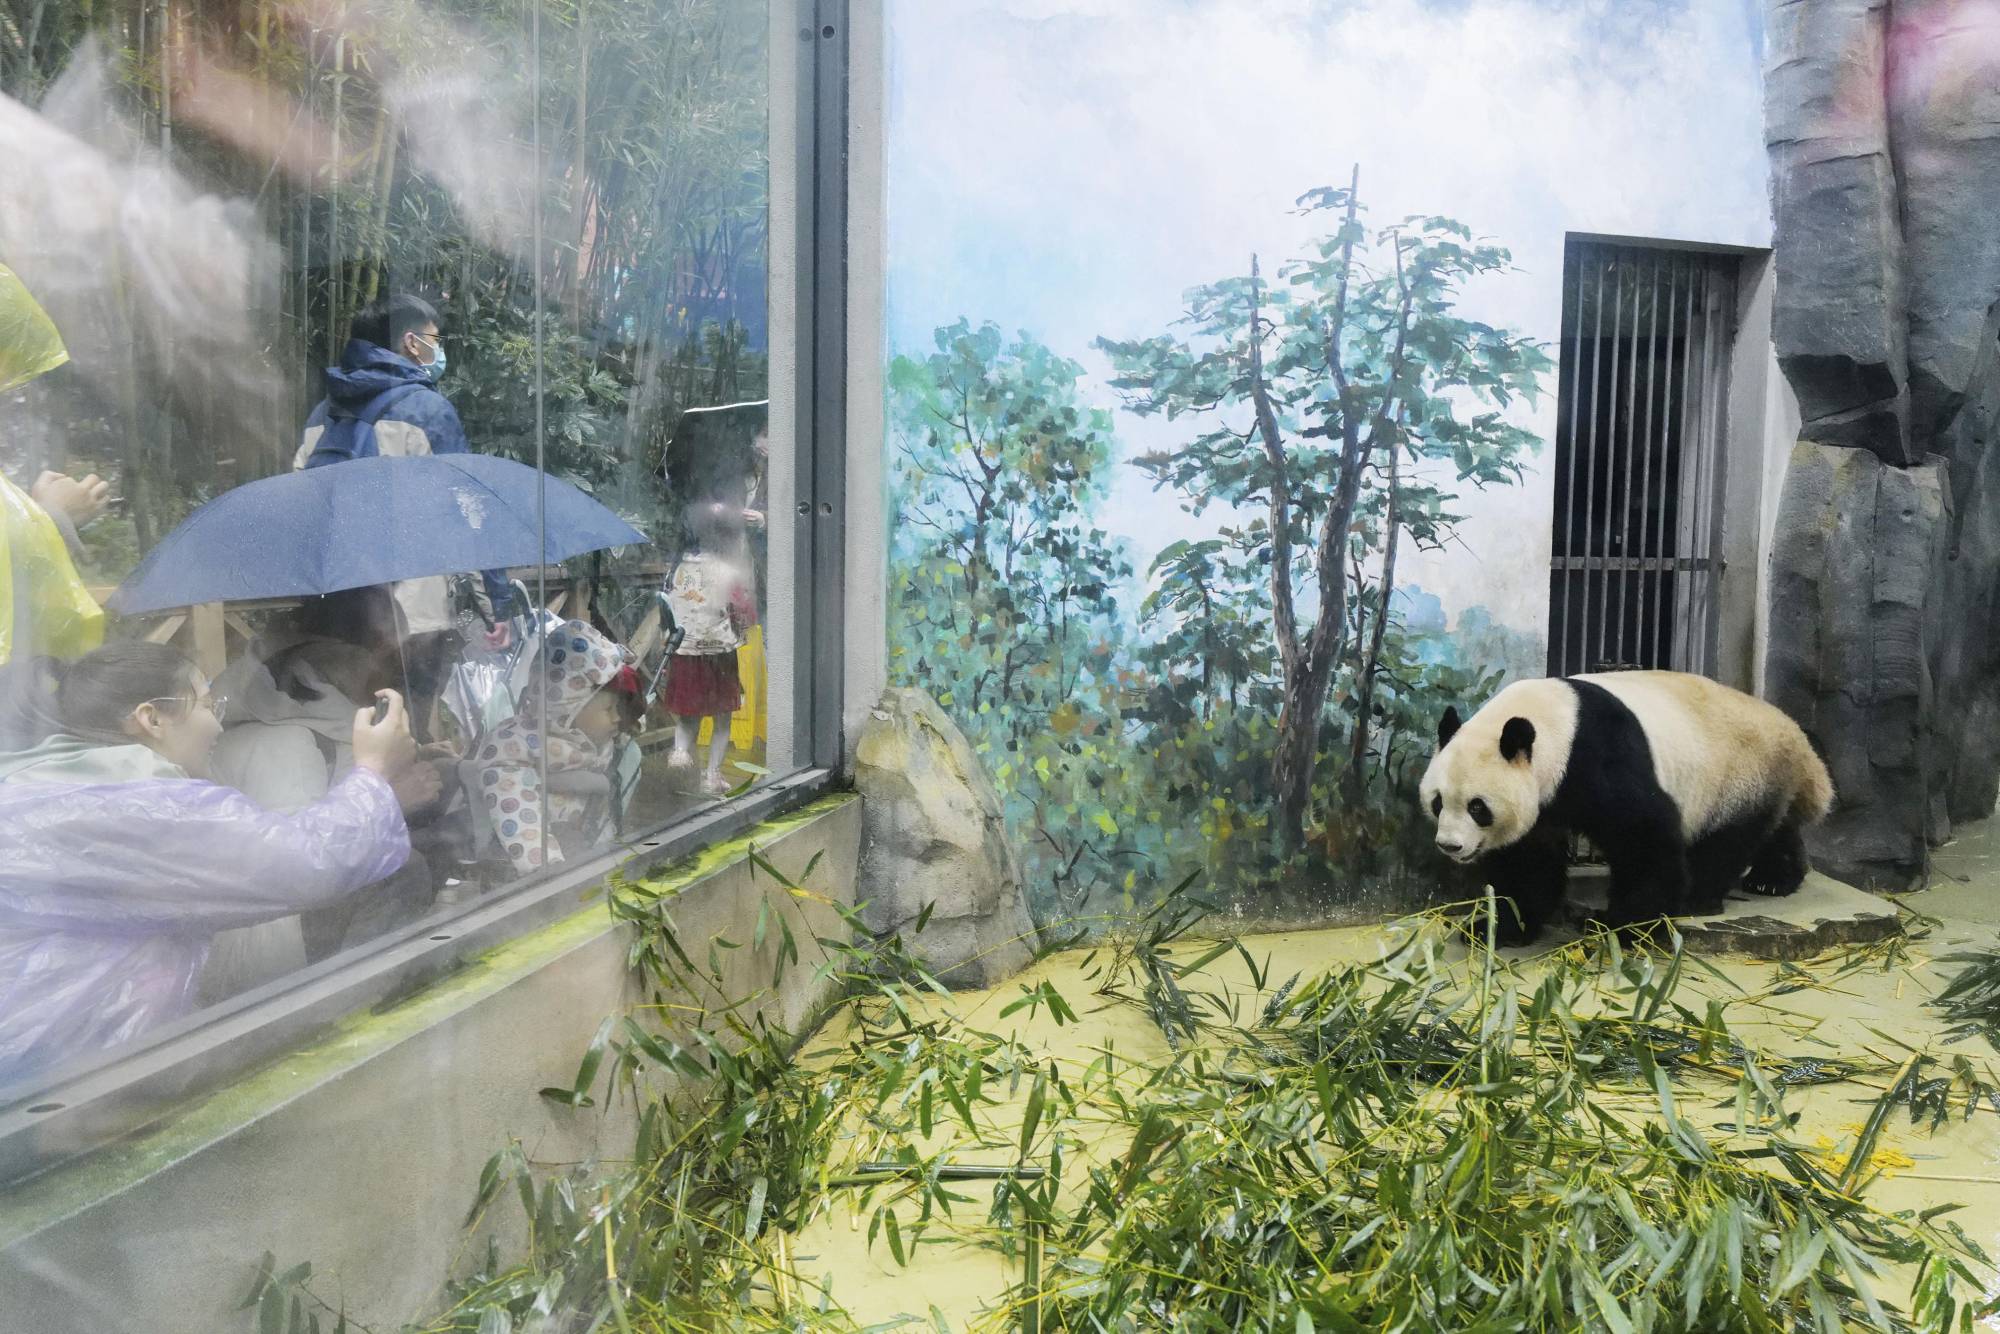 Giant pandas arrive in China from Wakayama zoo | The Japan Times